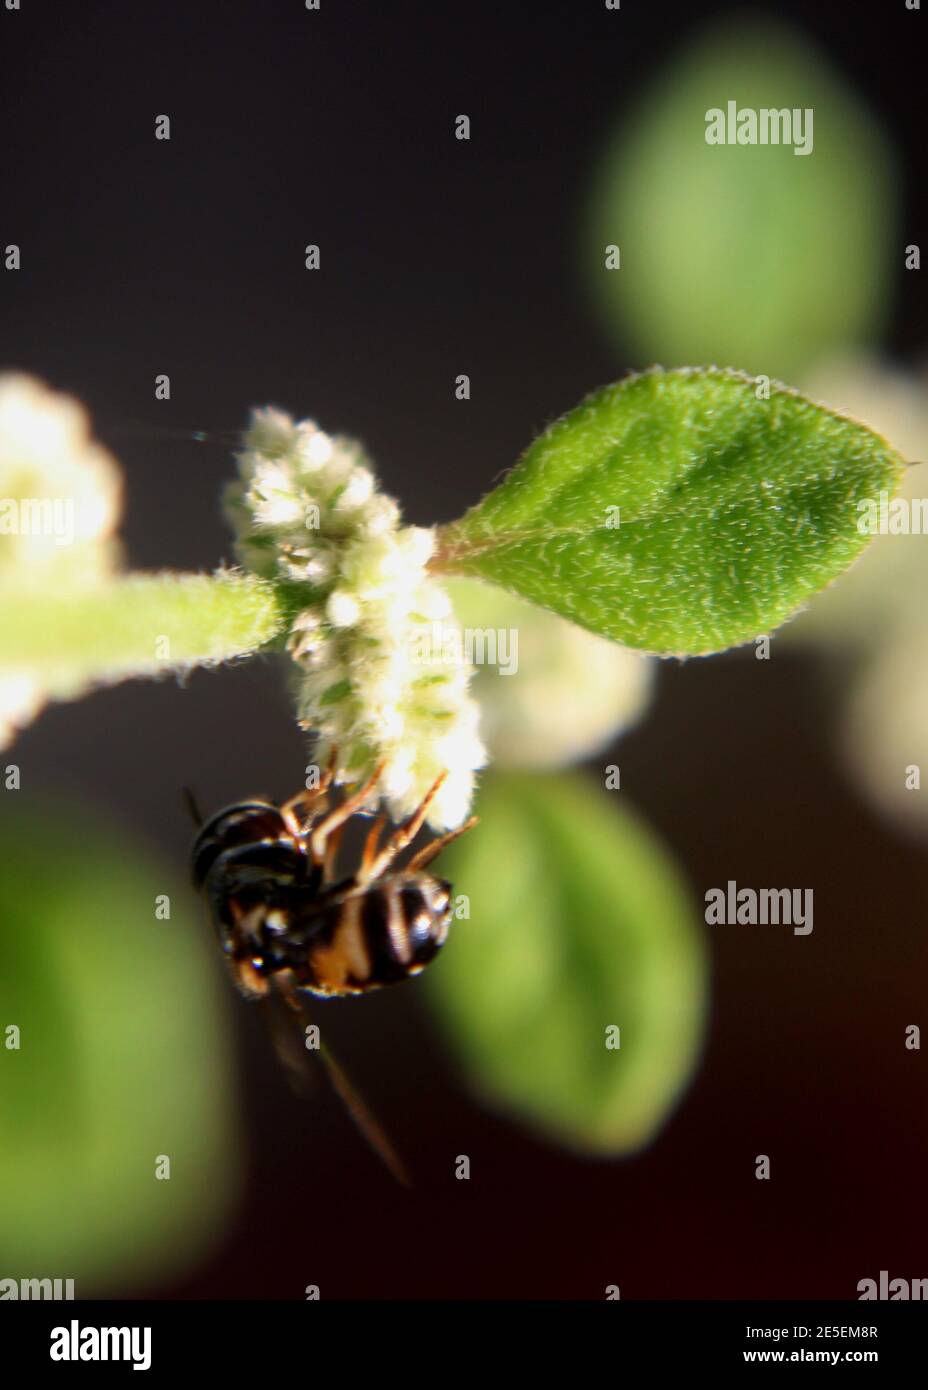 close up of a flying insect honey bee on small flower (Aerva lanata -mountain knotgrass - polpala plant)  in a home garden in Sri Lanka Stock Photo